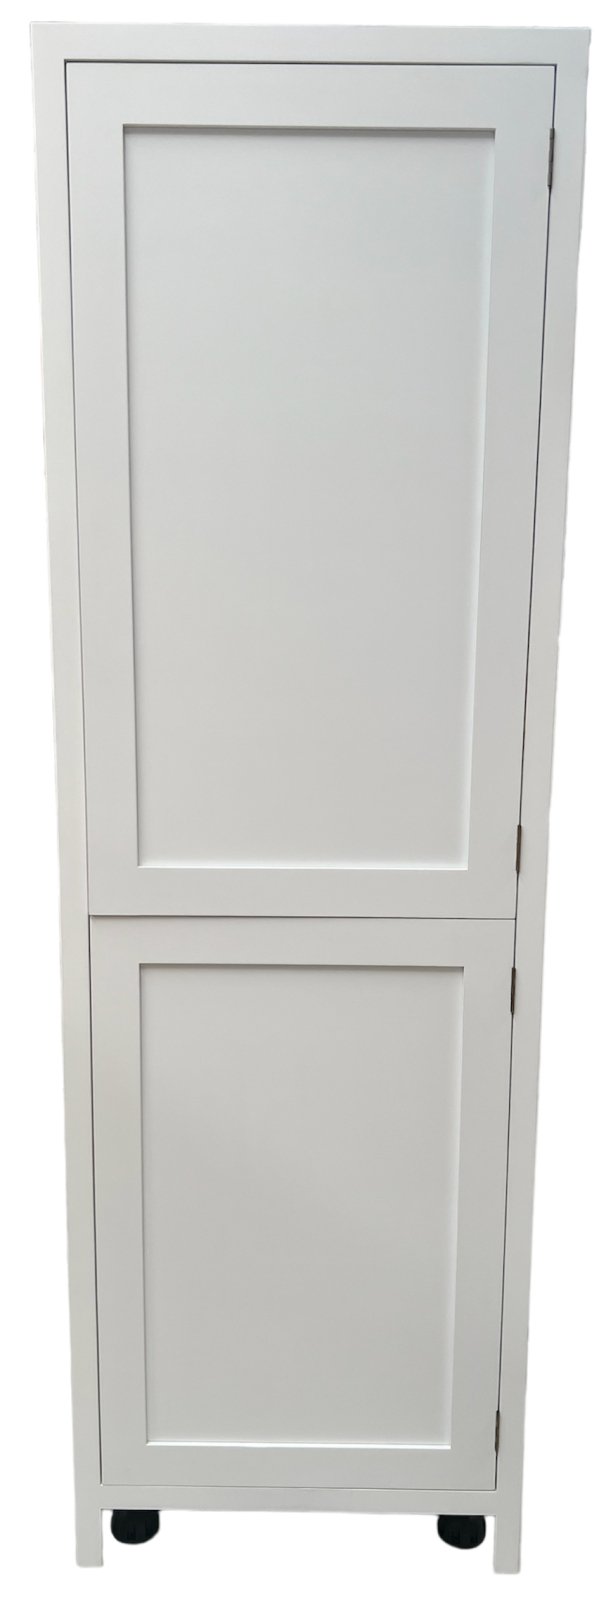 TFF 50/50 - 680mm Wide Tall double door Fridge or Freezer housing - Classic Kitchens Direct